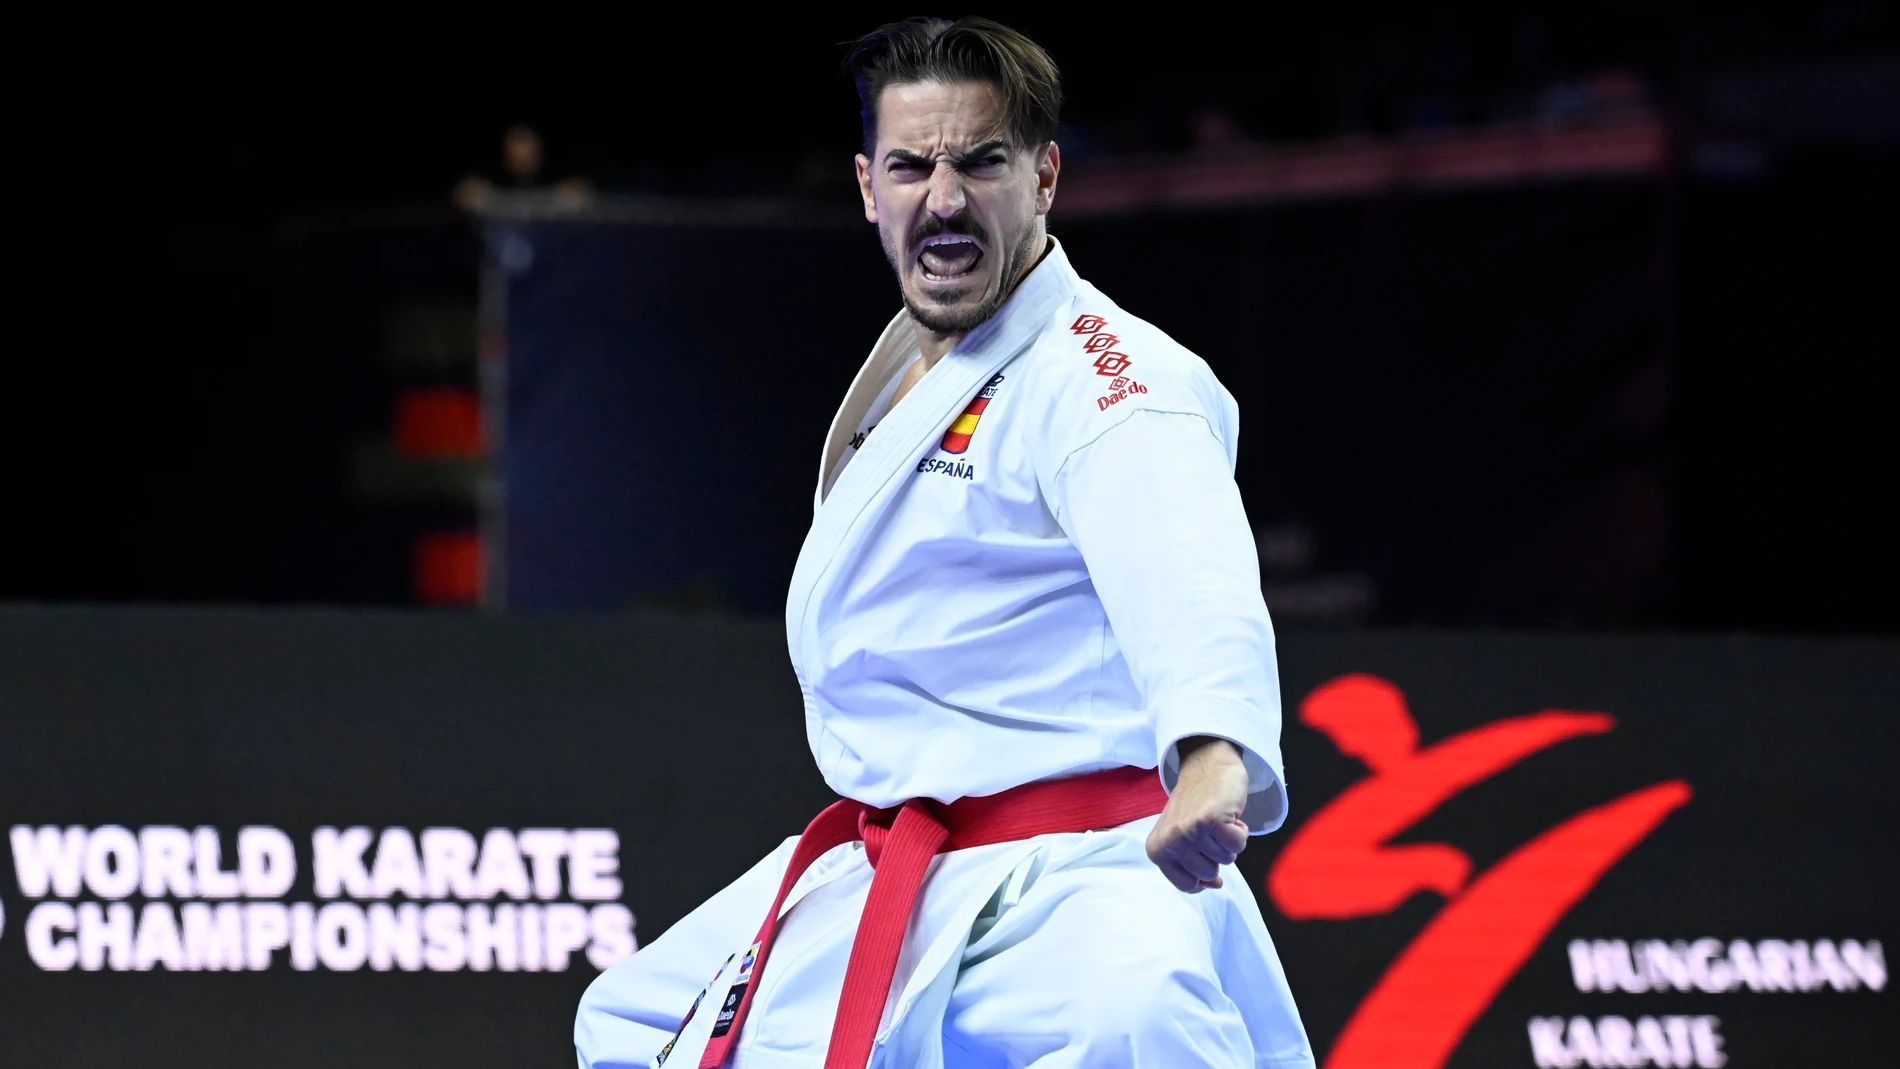 Budapest (Hungary), 28/10/2023.- Damien Quintero of Spain competes in the men's kata final of the 26th WKF World Karate Championships in Papp Laszlo Sports Arena in Budapest, Hungary, 28 October 2023. (Hungría, España) EFE/EPA/TAMAS KOVACS HUNGARY OUT 